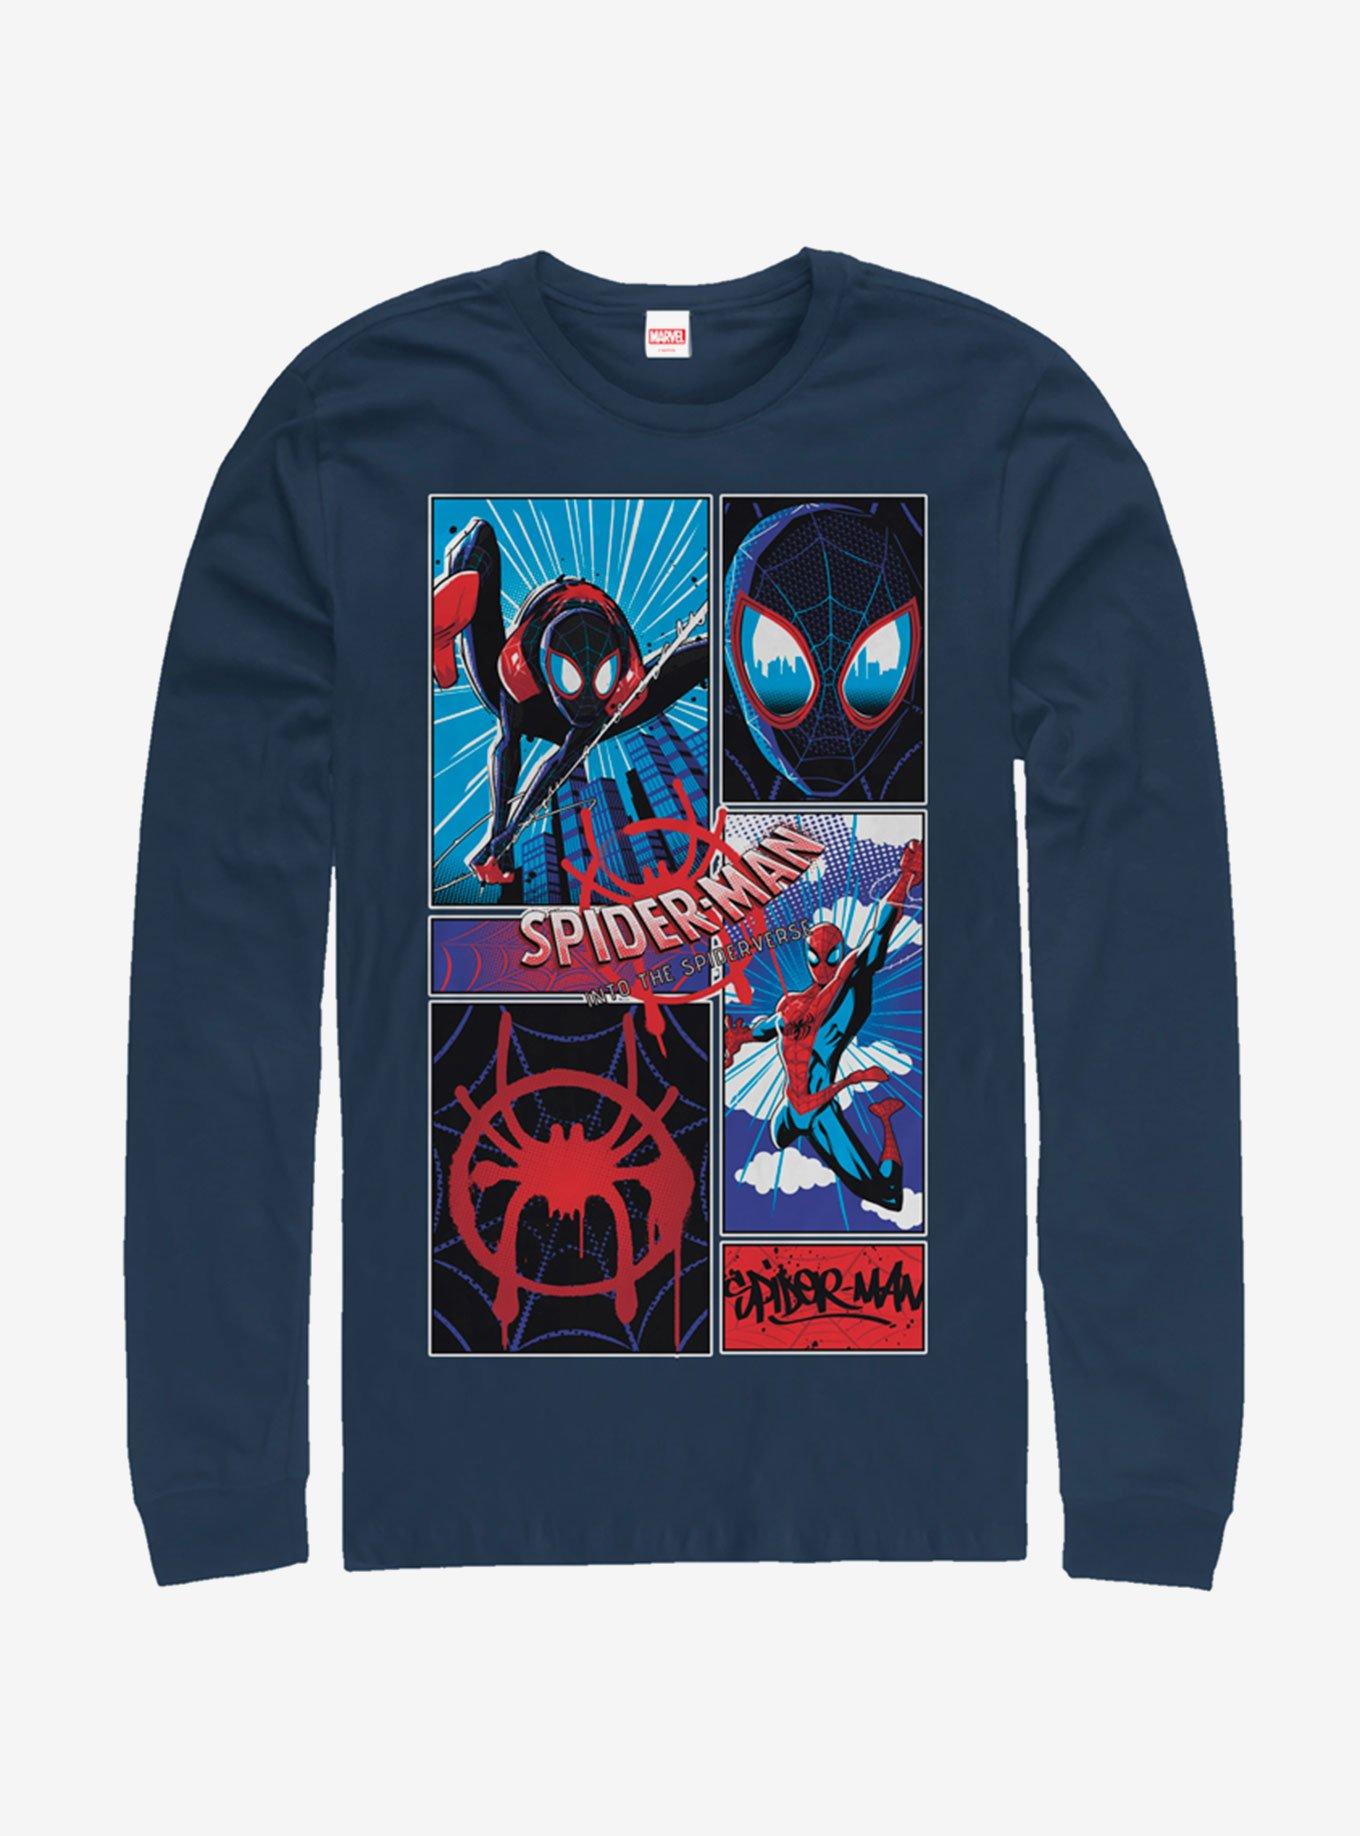 Marvel Spider-Man: Into The Spider-Verse Comic Spiders Long-Sleeve T-Shirt, NAVY, hi-res